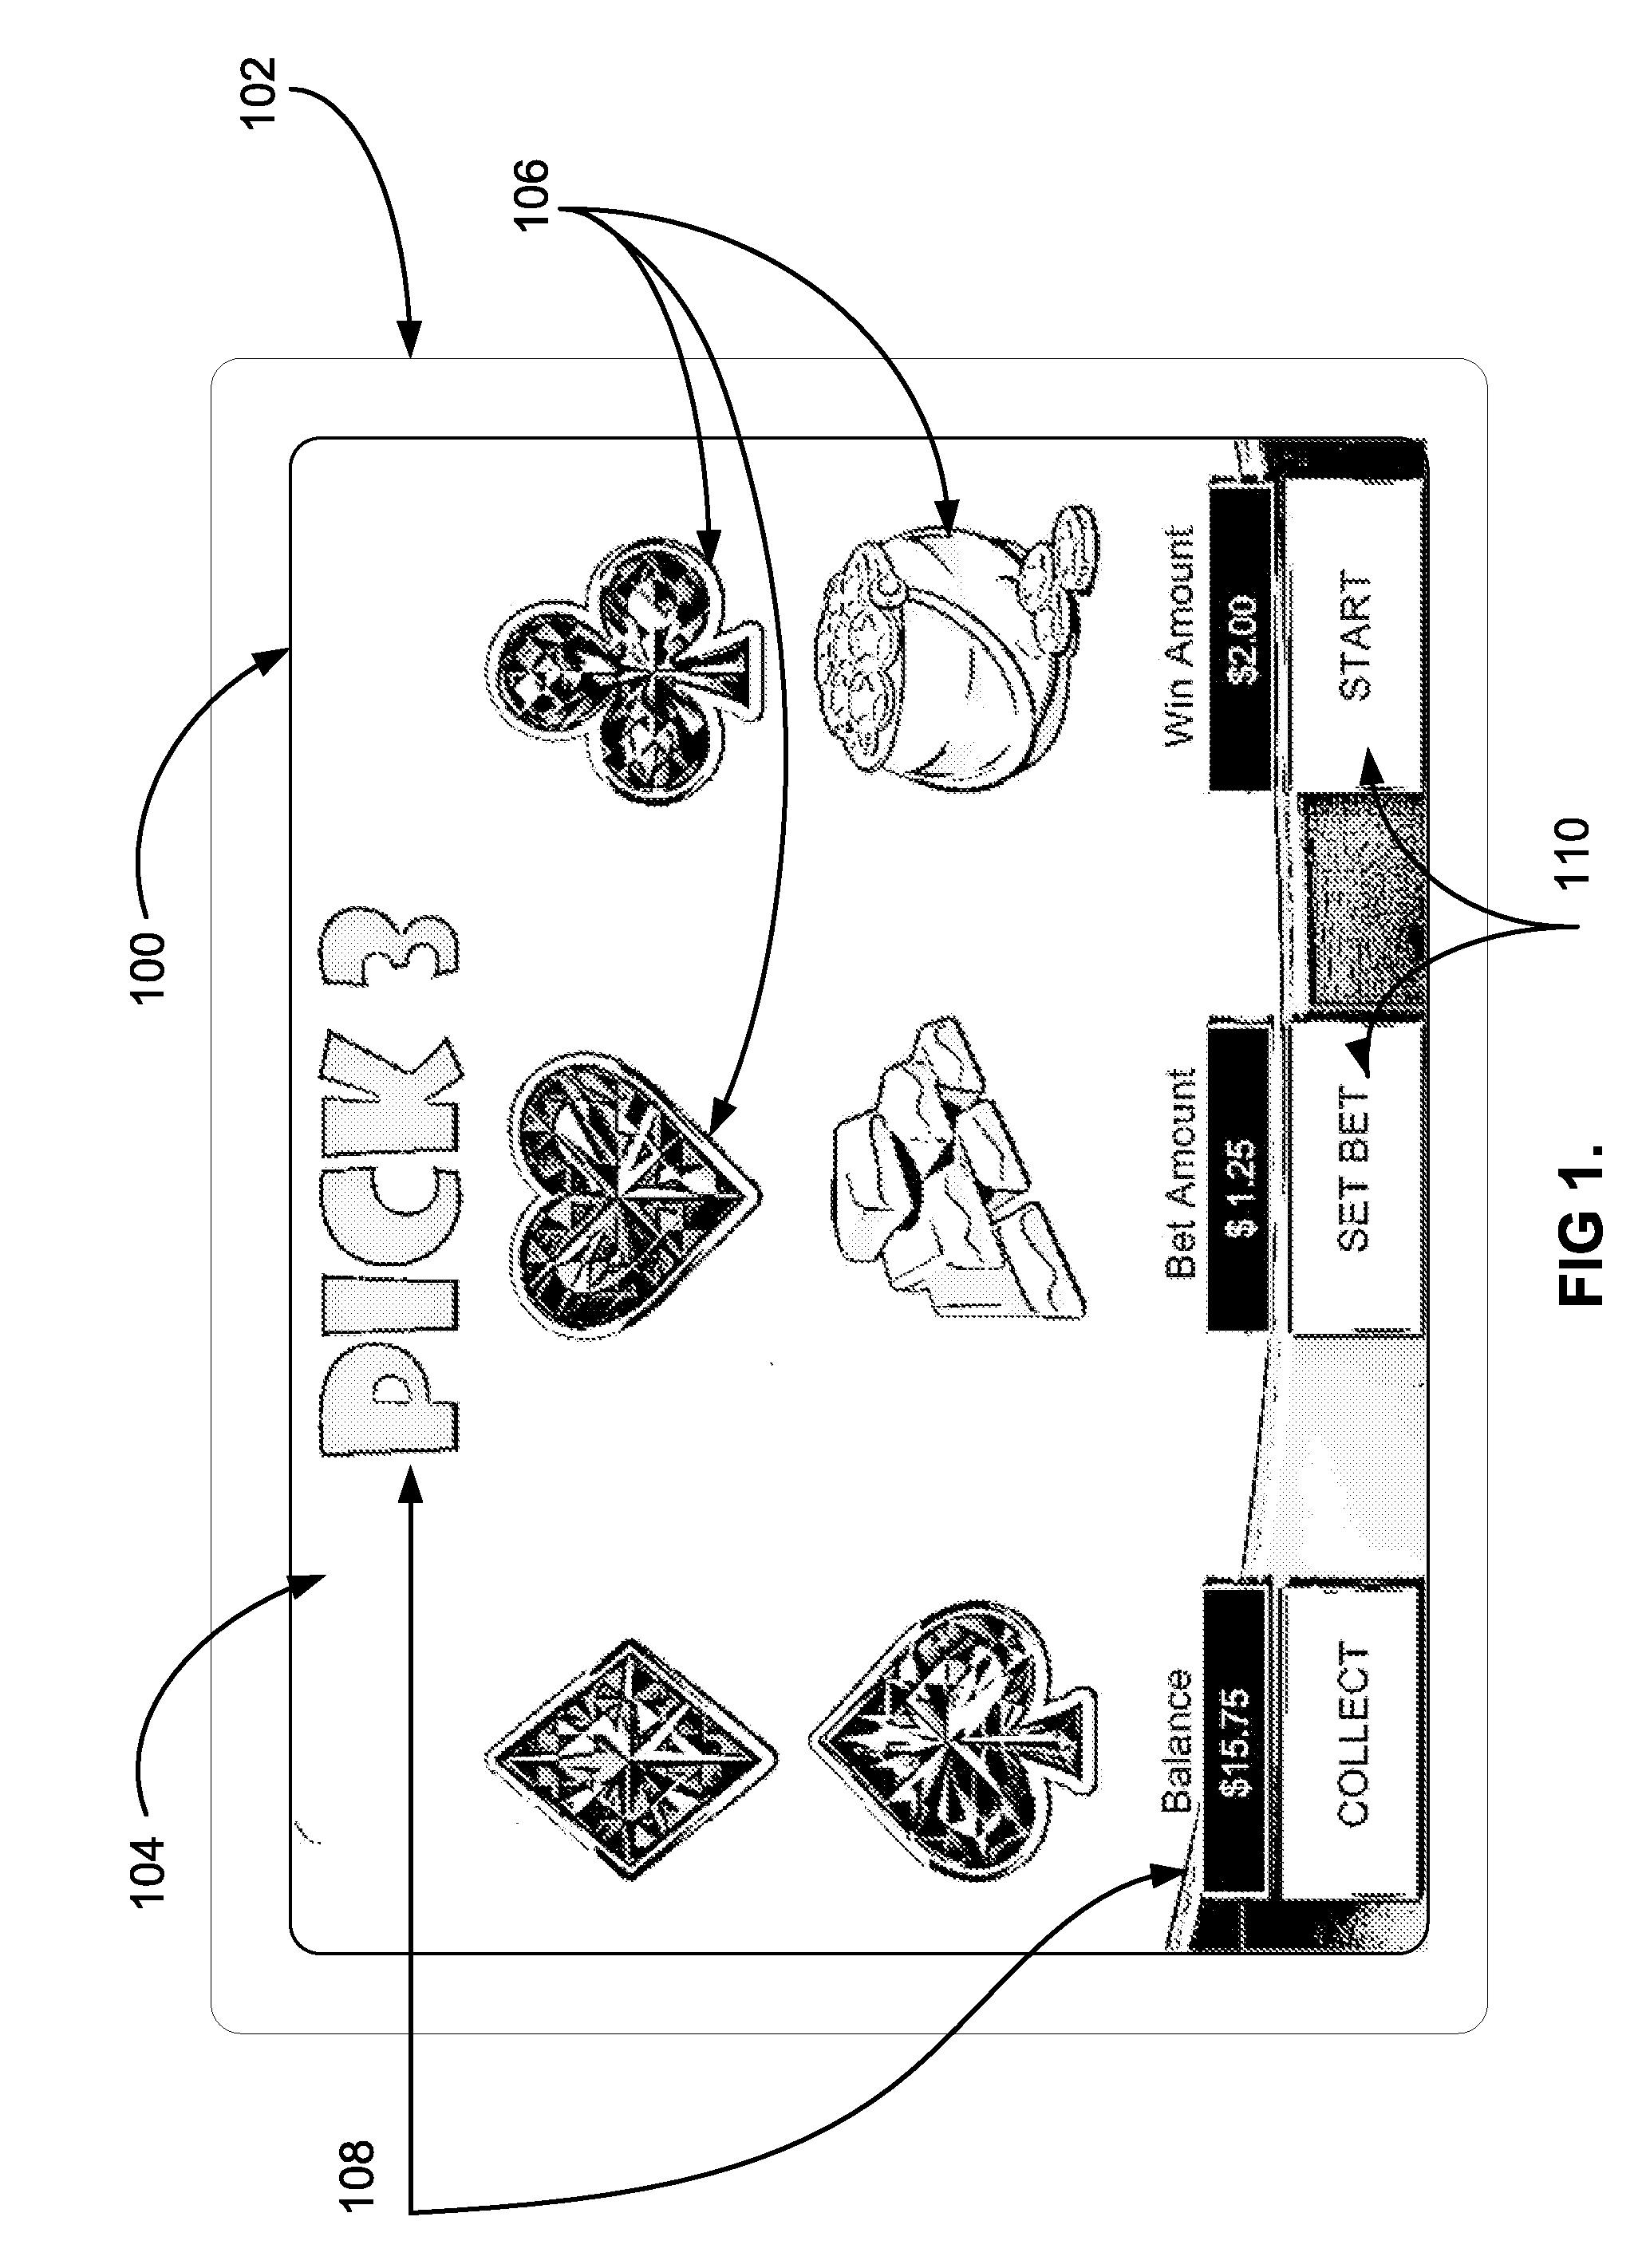 System and Method for Generating Modified Source Code Based on Change-Models